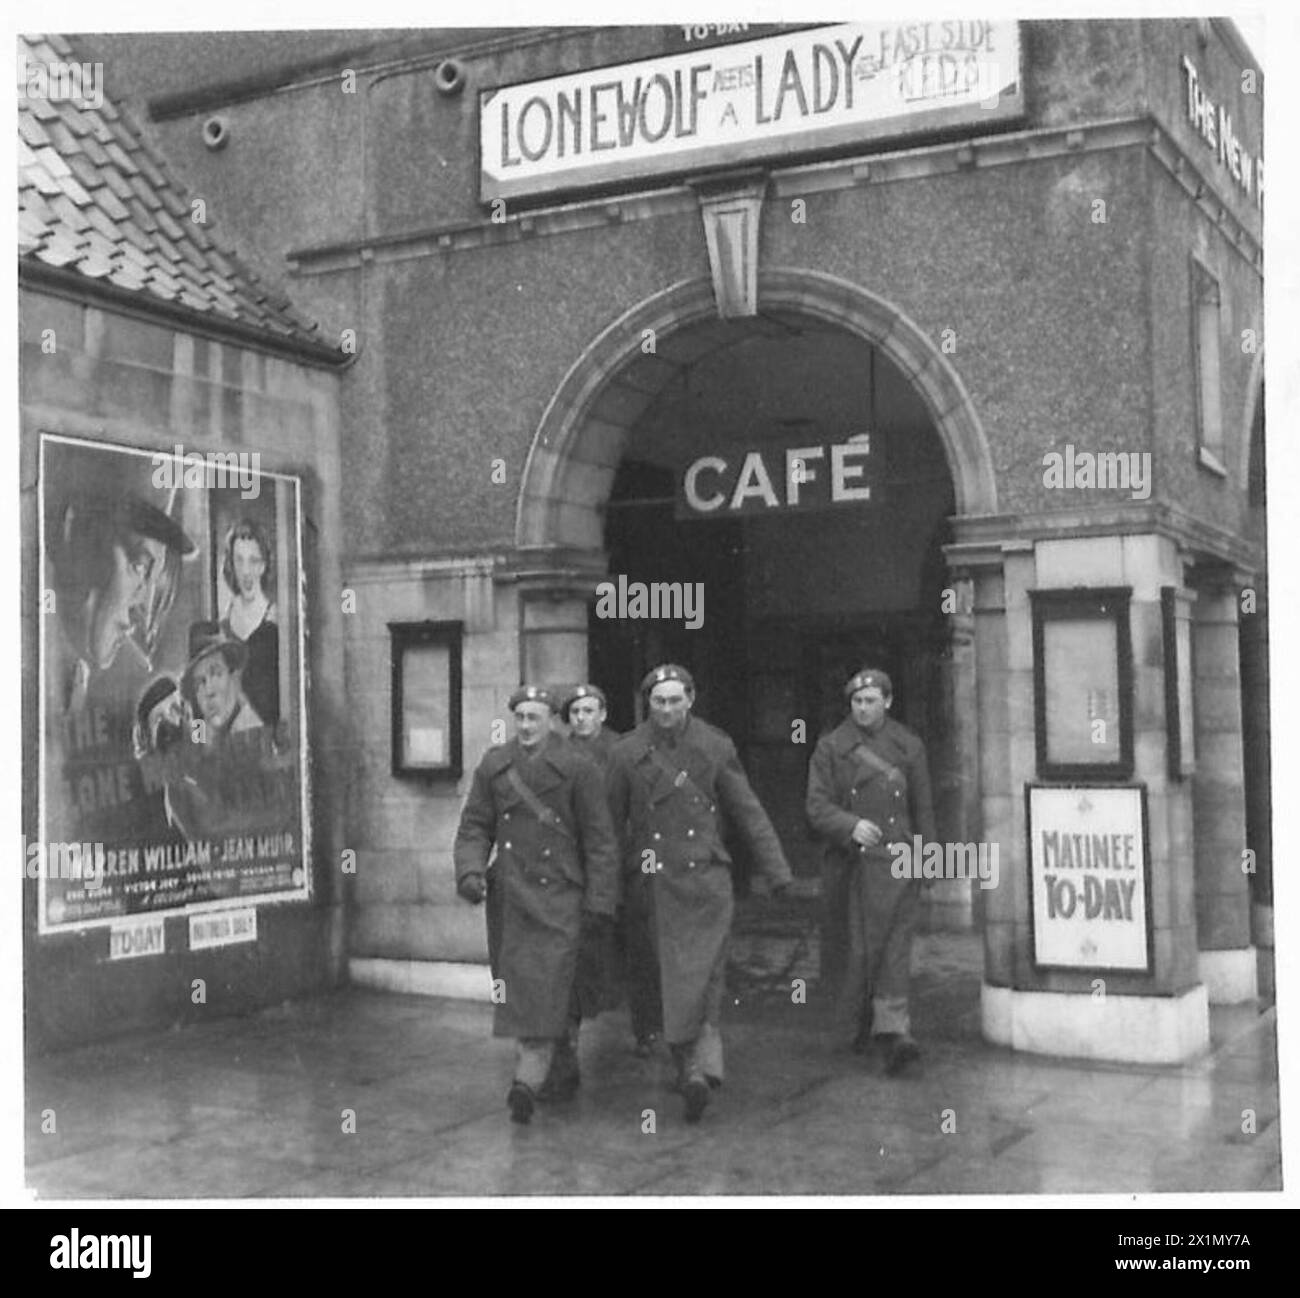 THE POLISH ARMY IN BRITAIN, 1940-1947 - Polish soldiers leaving the local cinema in Cupar. The movie shown on that day was ' The Lone Wolf Meets a Lady'. A special series of photographs dealing with the domestic and social life of troops of the 1st Rifle Brigade (1st Polish Corps) in Scotland where the officers and men are firmly established favourites with the local people. Some of the young soldiers were attending universities in Poland when war broke out. On arrival in Britain they joined the Polish Forces and continued their studies at the St Andrews University in order to finish their deg Stock Photo